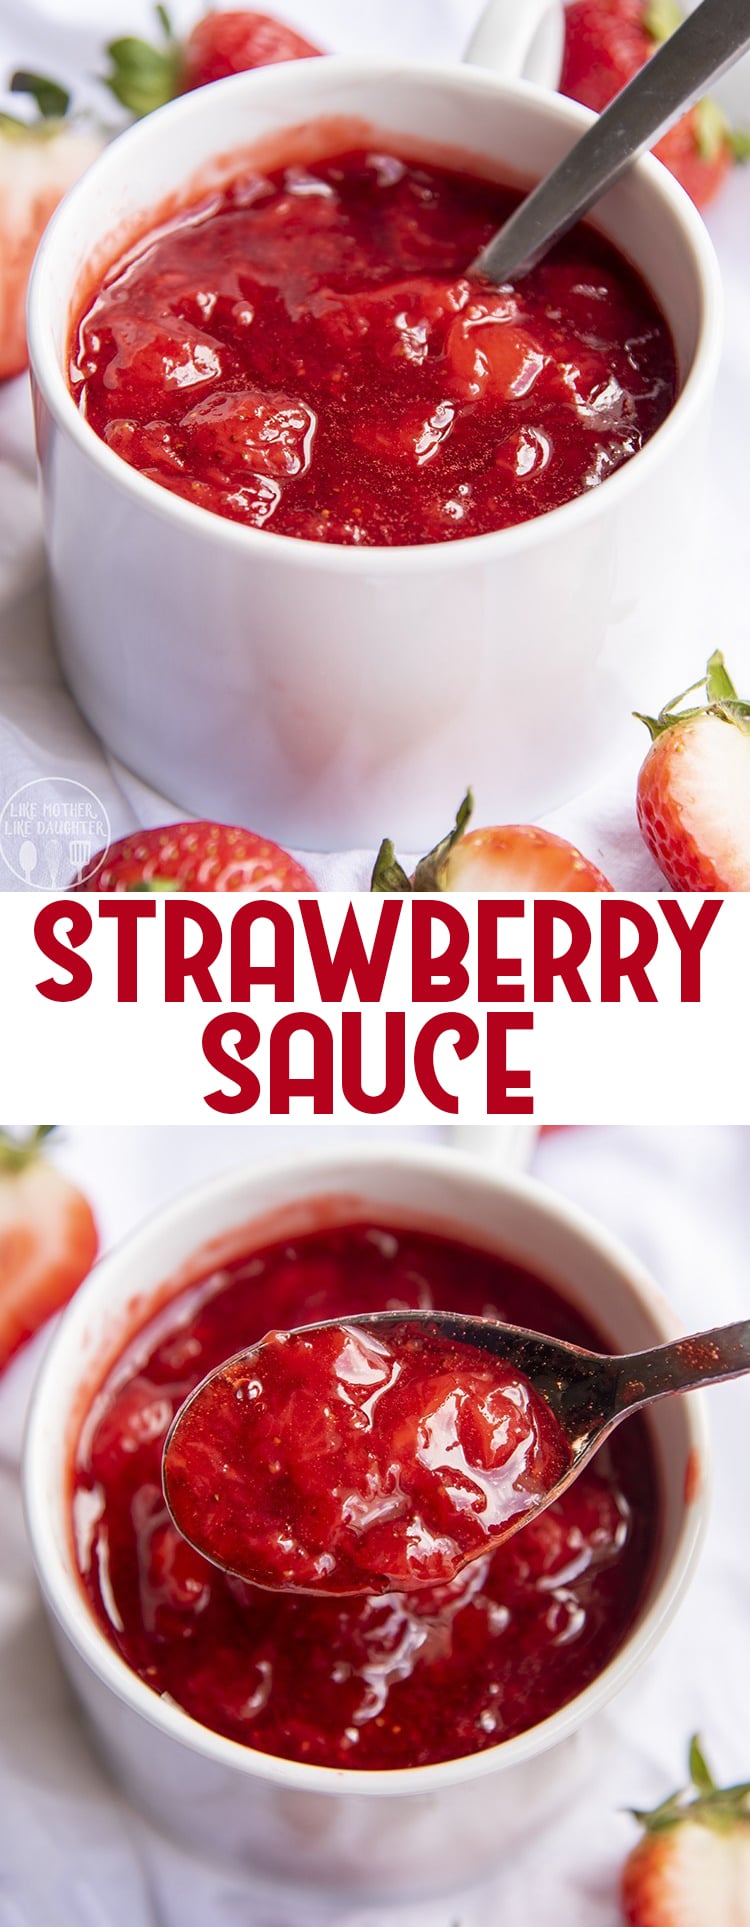 This homemade strawberry sauce is only 3 ingredients, and is the perfect strawberry topping to go on ice cream, cheesecake, pancakes, and more!